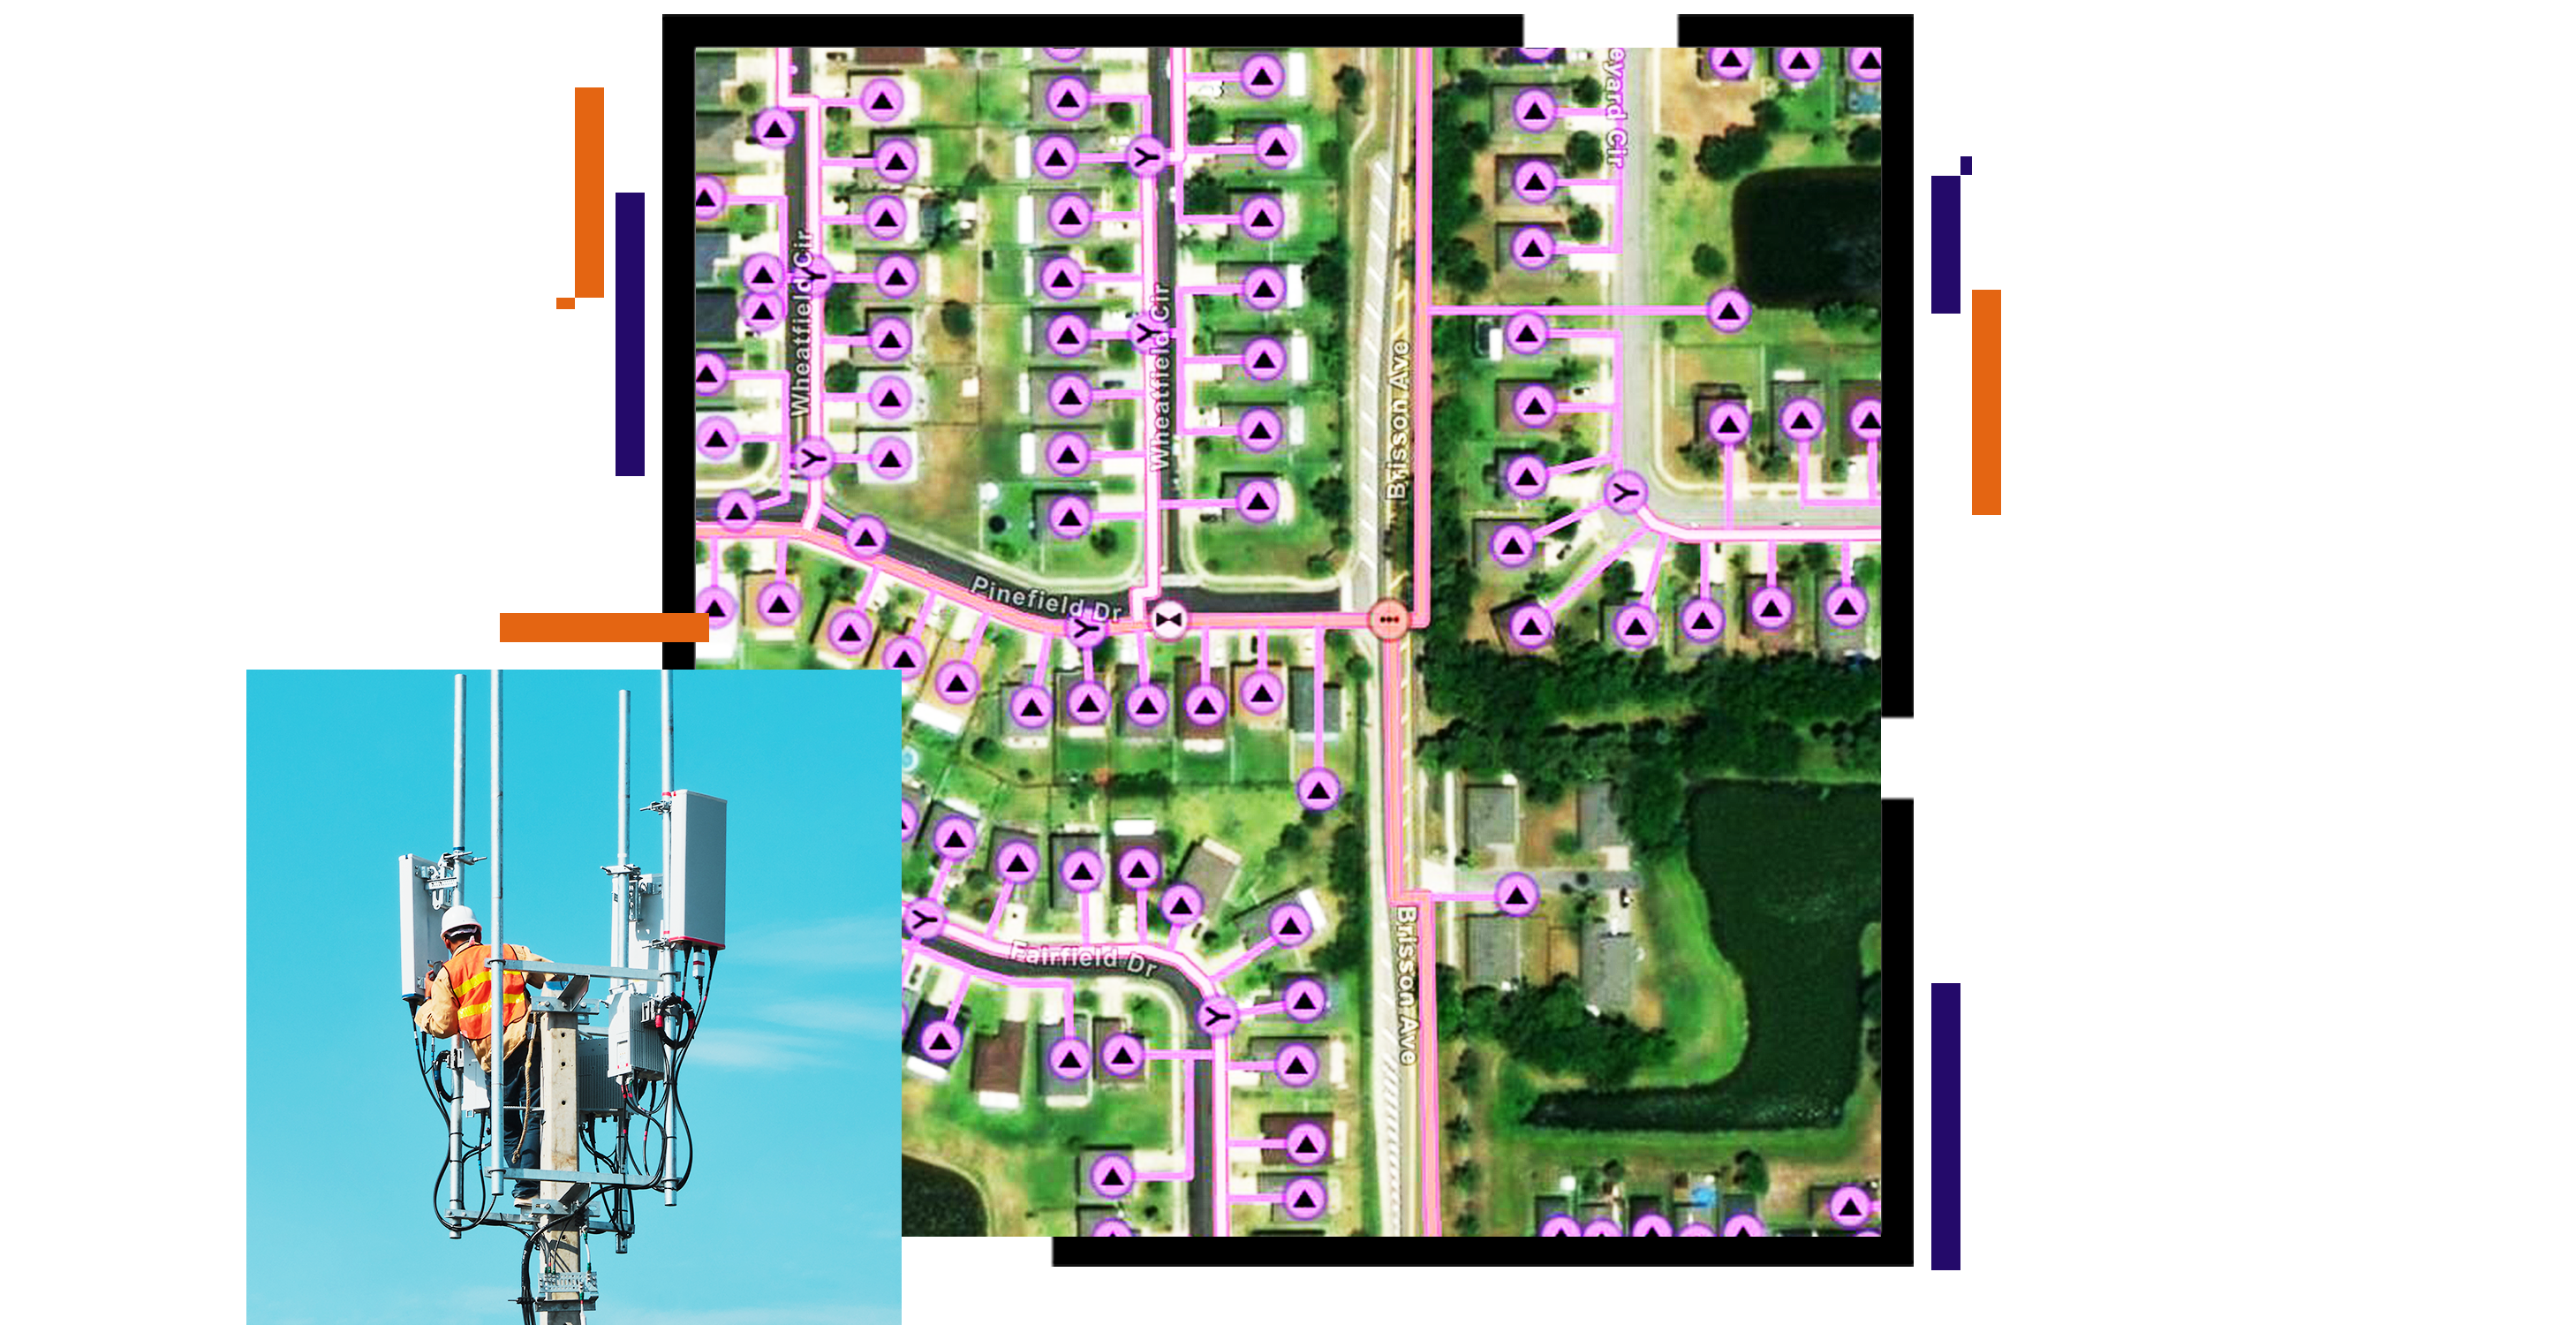 An aerial photo of a green tree-filled neighborhood with streets and houses marked in purple, overlaid with a photo of a cellular base station against a clear blue sky